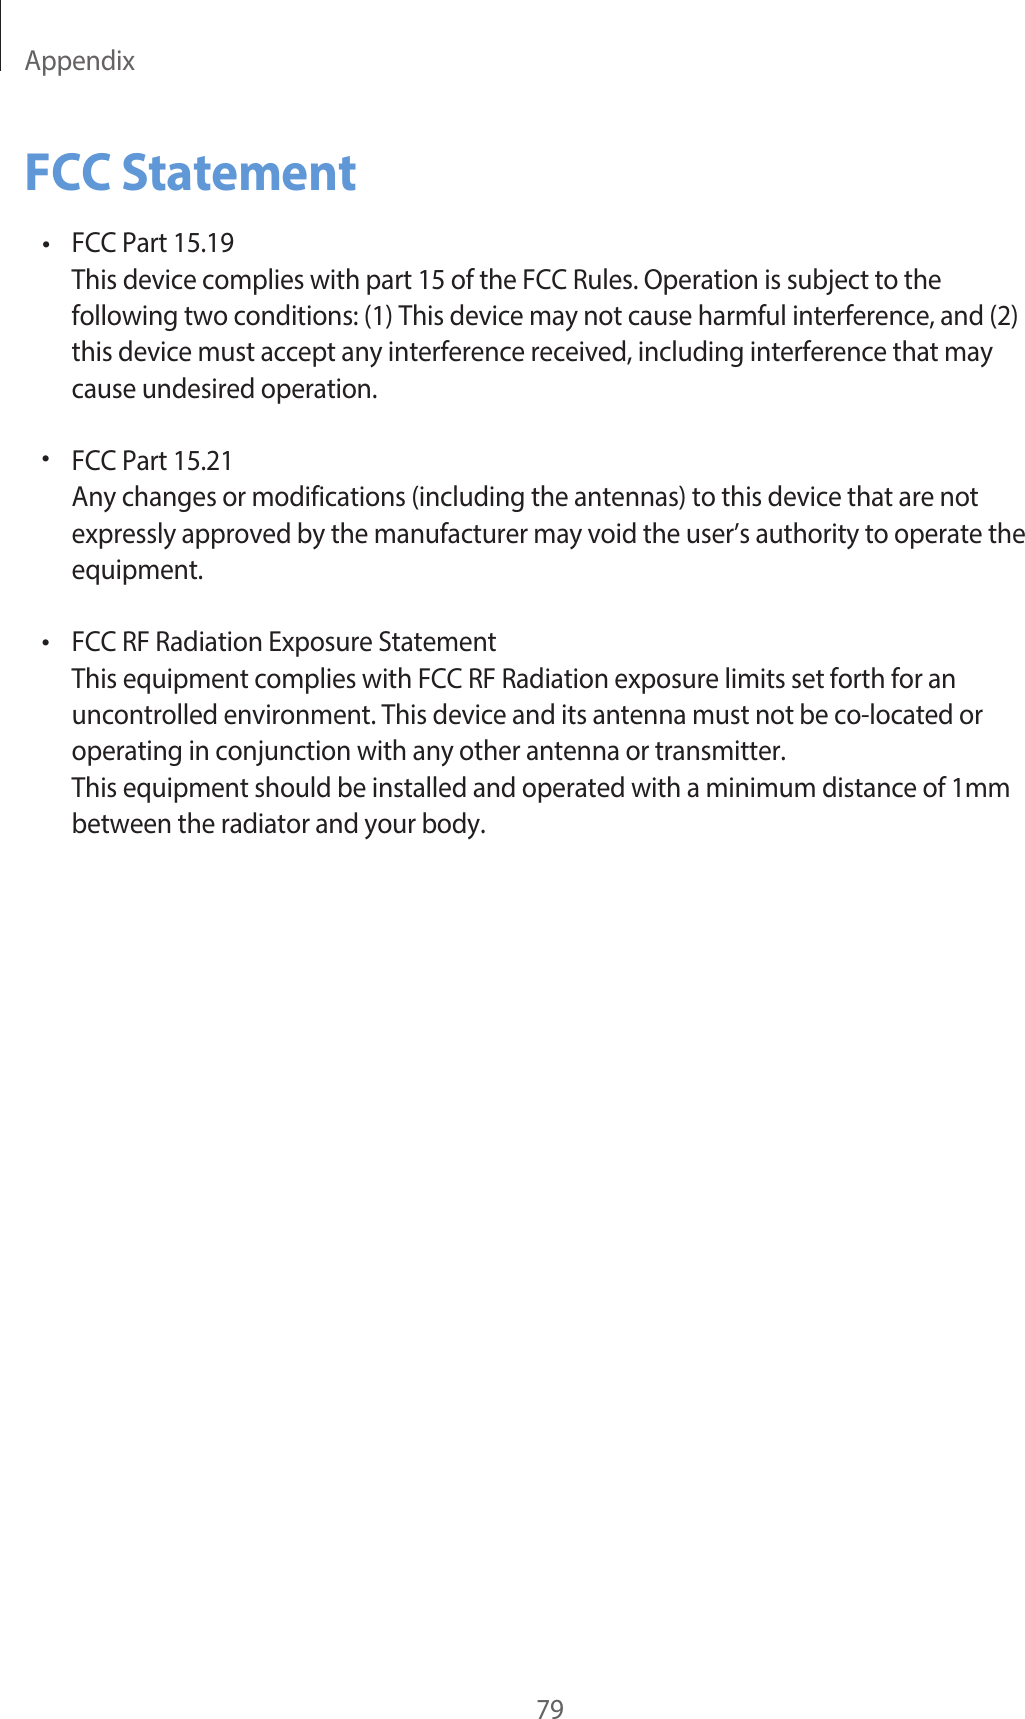 Appendix79FCC Statement•FCC Part 15.19This device complies with part 15 of the FCC Rules. Operation is subject to thefollowing two conditions: (1) This device may not cause harmful interference, and (2)this device must accept any interference received, including interference that maycause undesired operation.FCC Part 15.21Any changes or modifications (including the antennas) to this device that are not expressly approved by the manufacturer may void the user’s authority to operate the equipment.FCC RF Radiation Exposure StatementThis equipment complies with FCC RF Radiation exposure limits set forth for an uncontrolled environment. This device and its antenna must not be co-located or operating in conjunction with any other antenna or transmitter.This equipment should be installed and operated with a minimum distance of 1mm between the radiator and your body.••